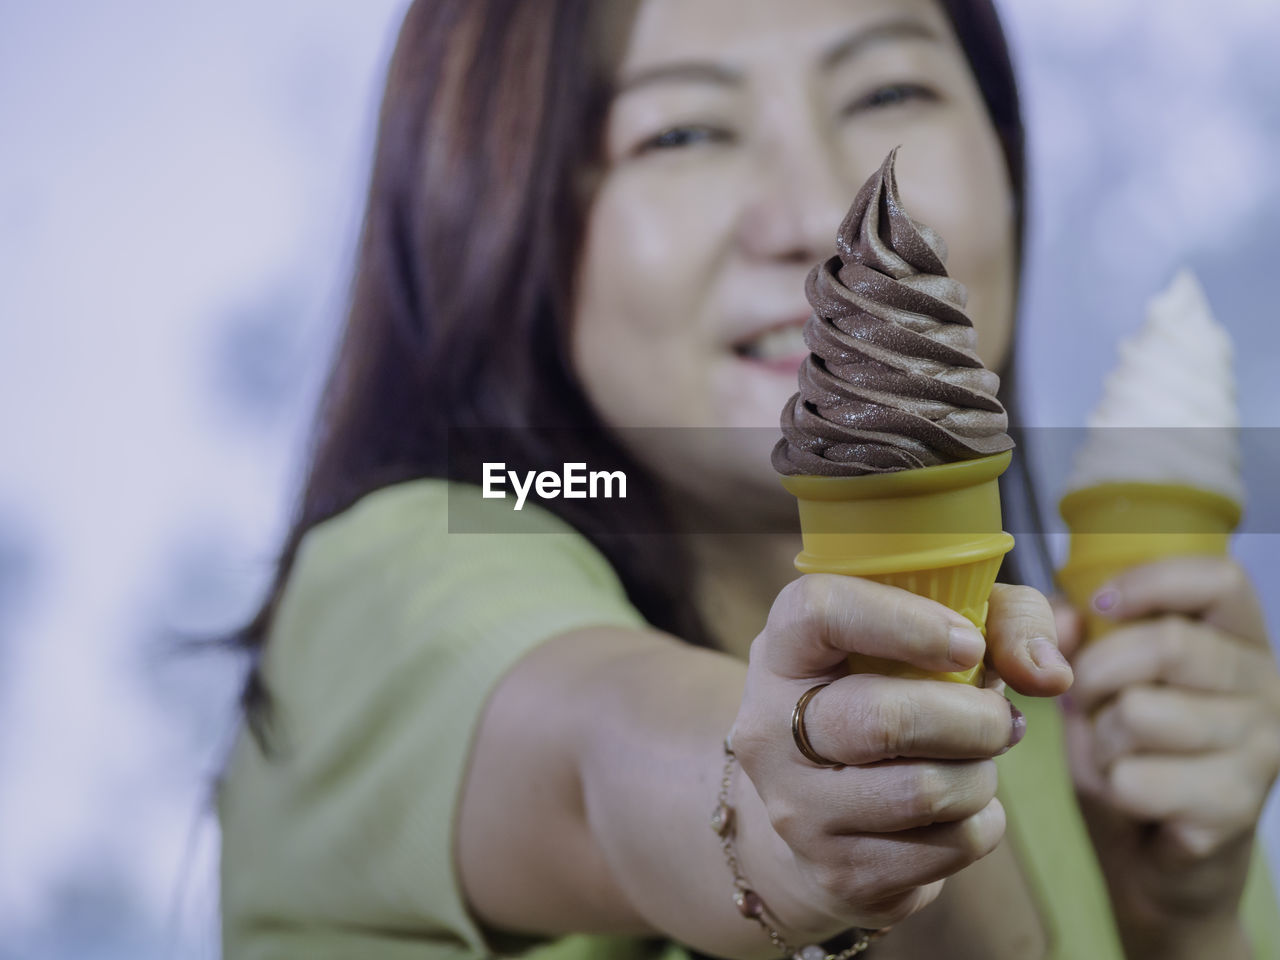 midsection of woman holding ice cream cone